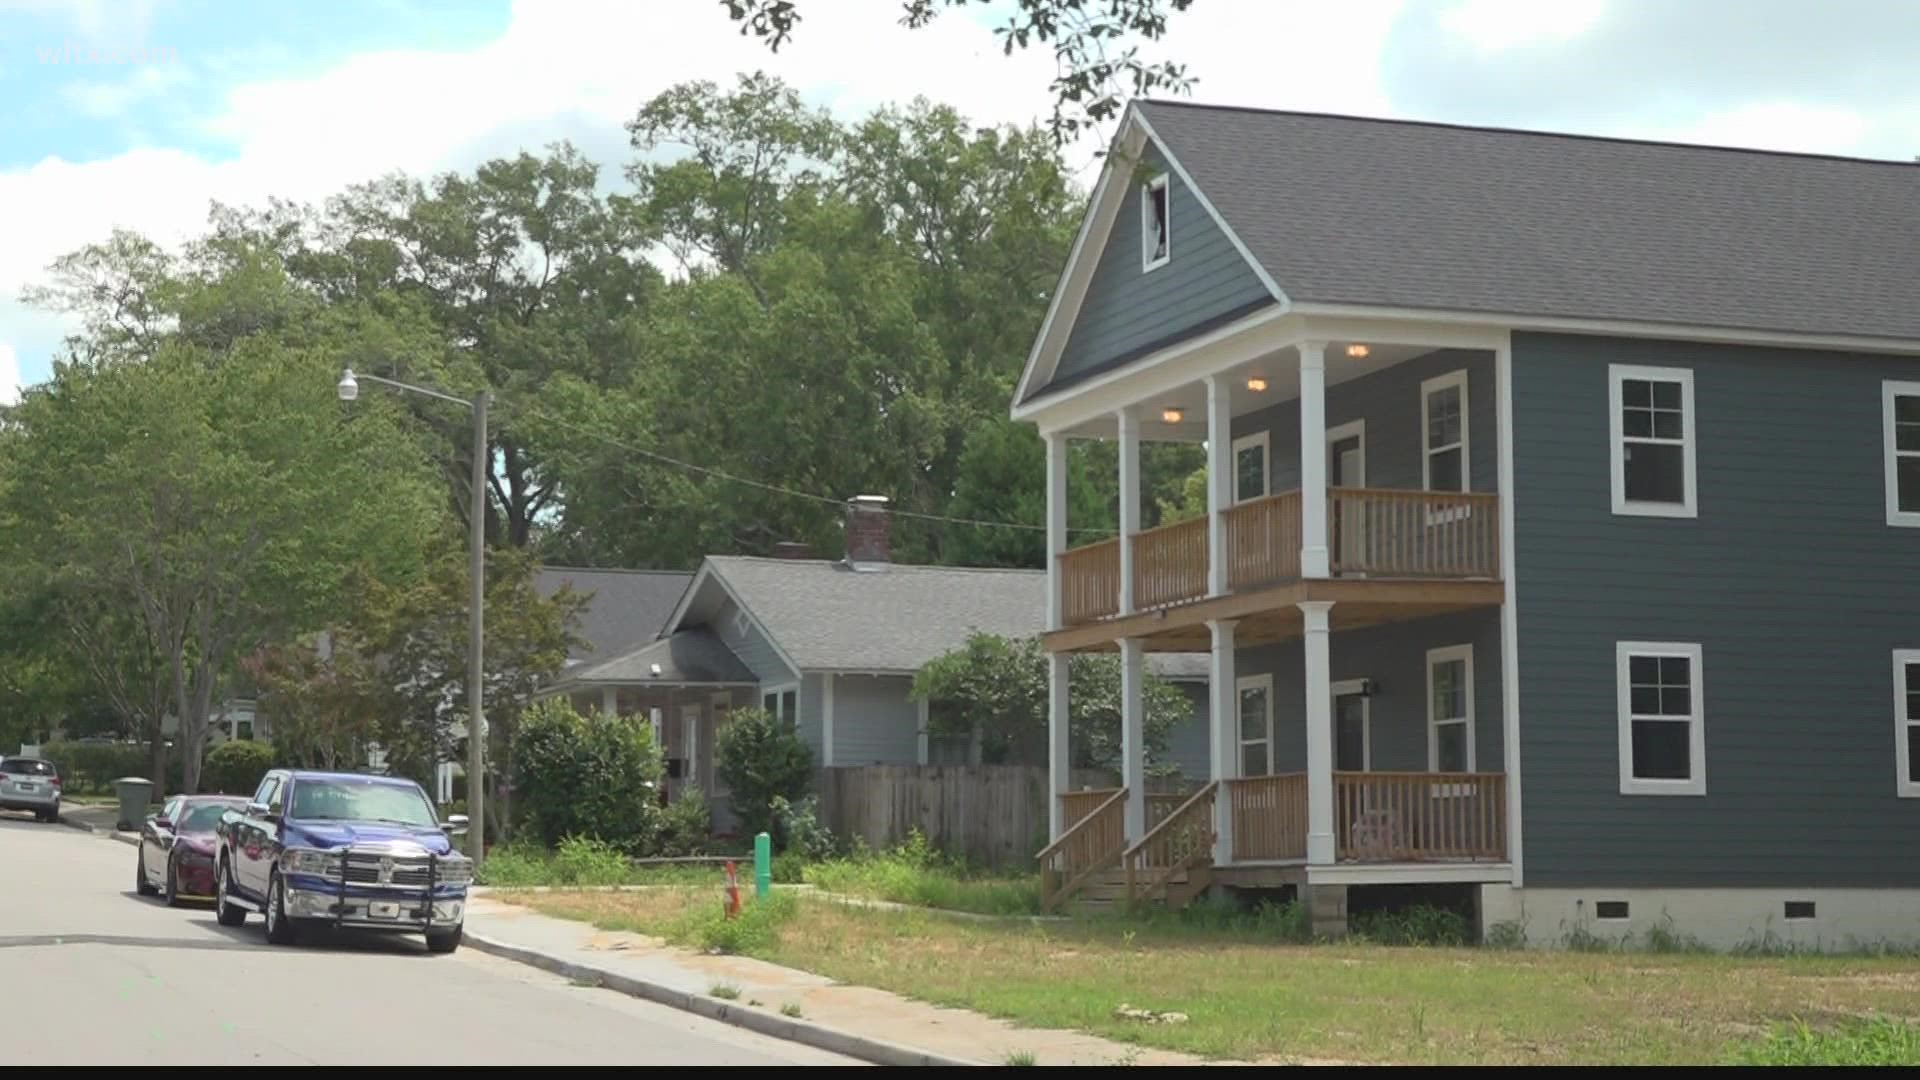 Demand for housing is skyrocketing in SC but the supply remains low.